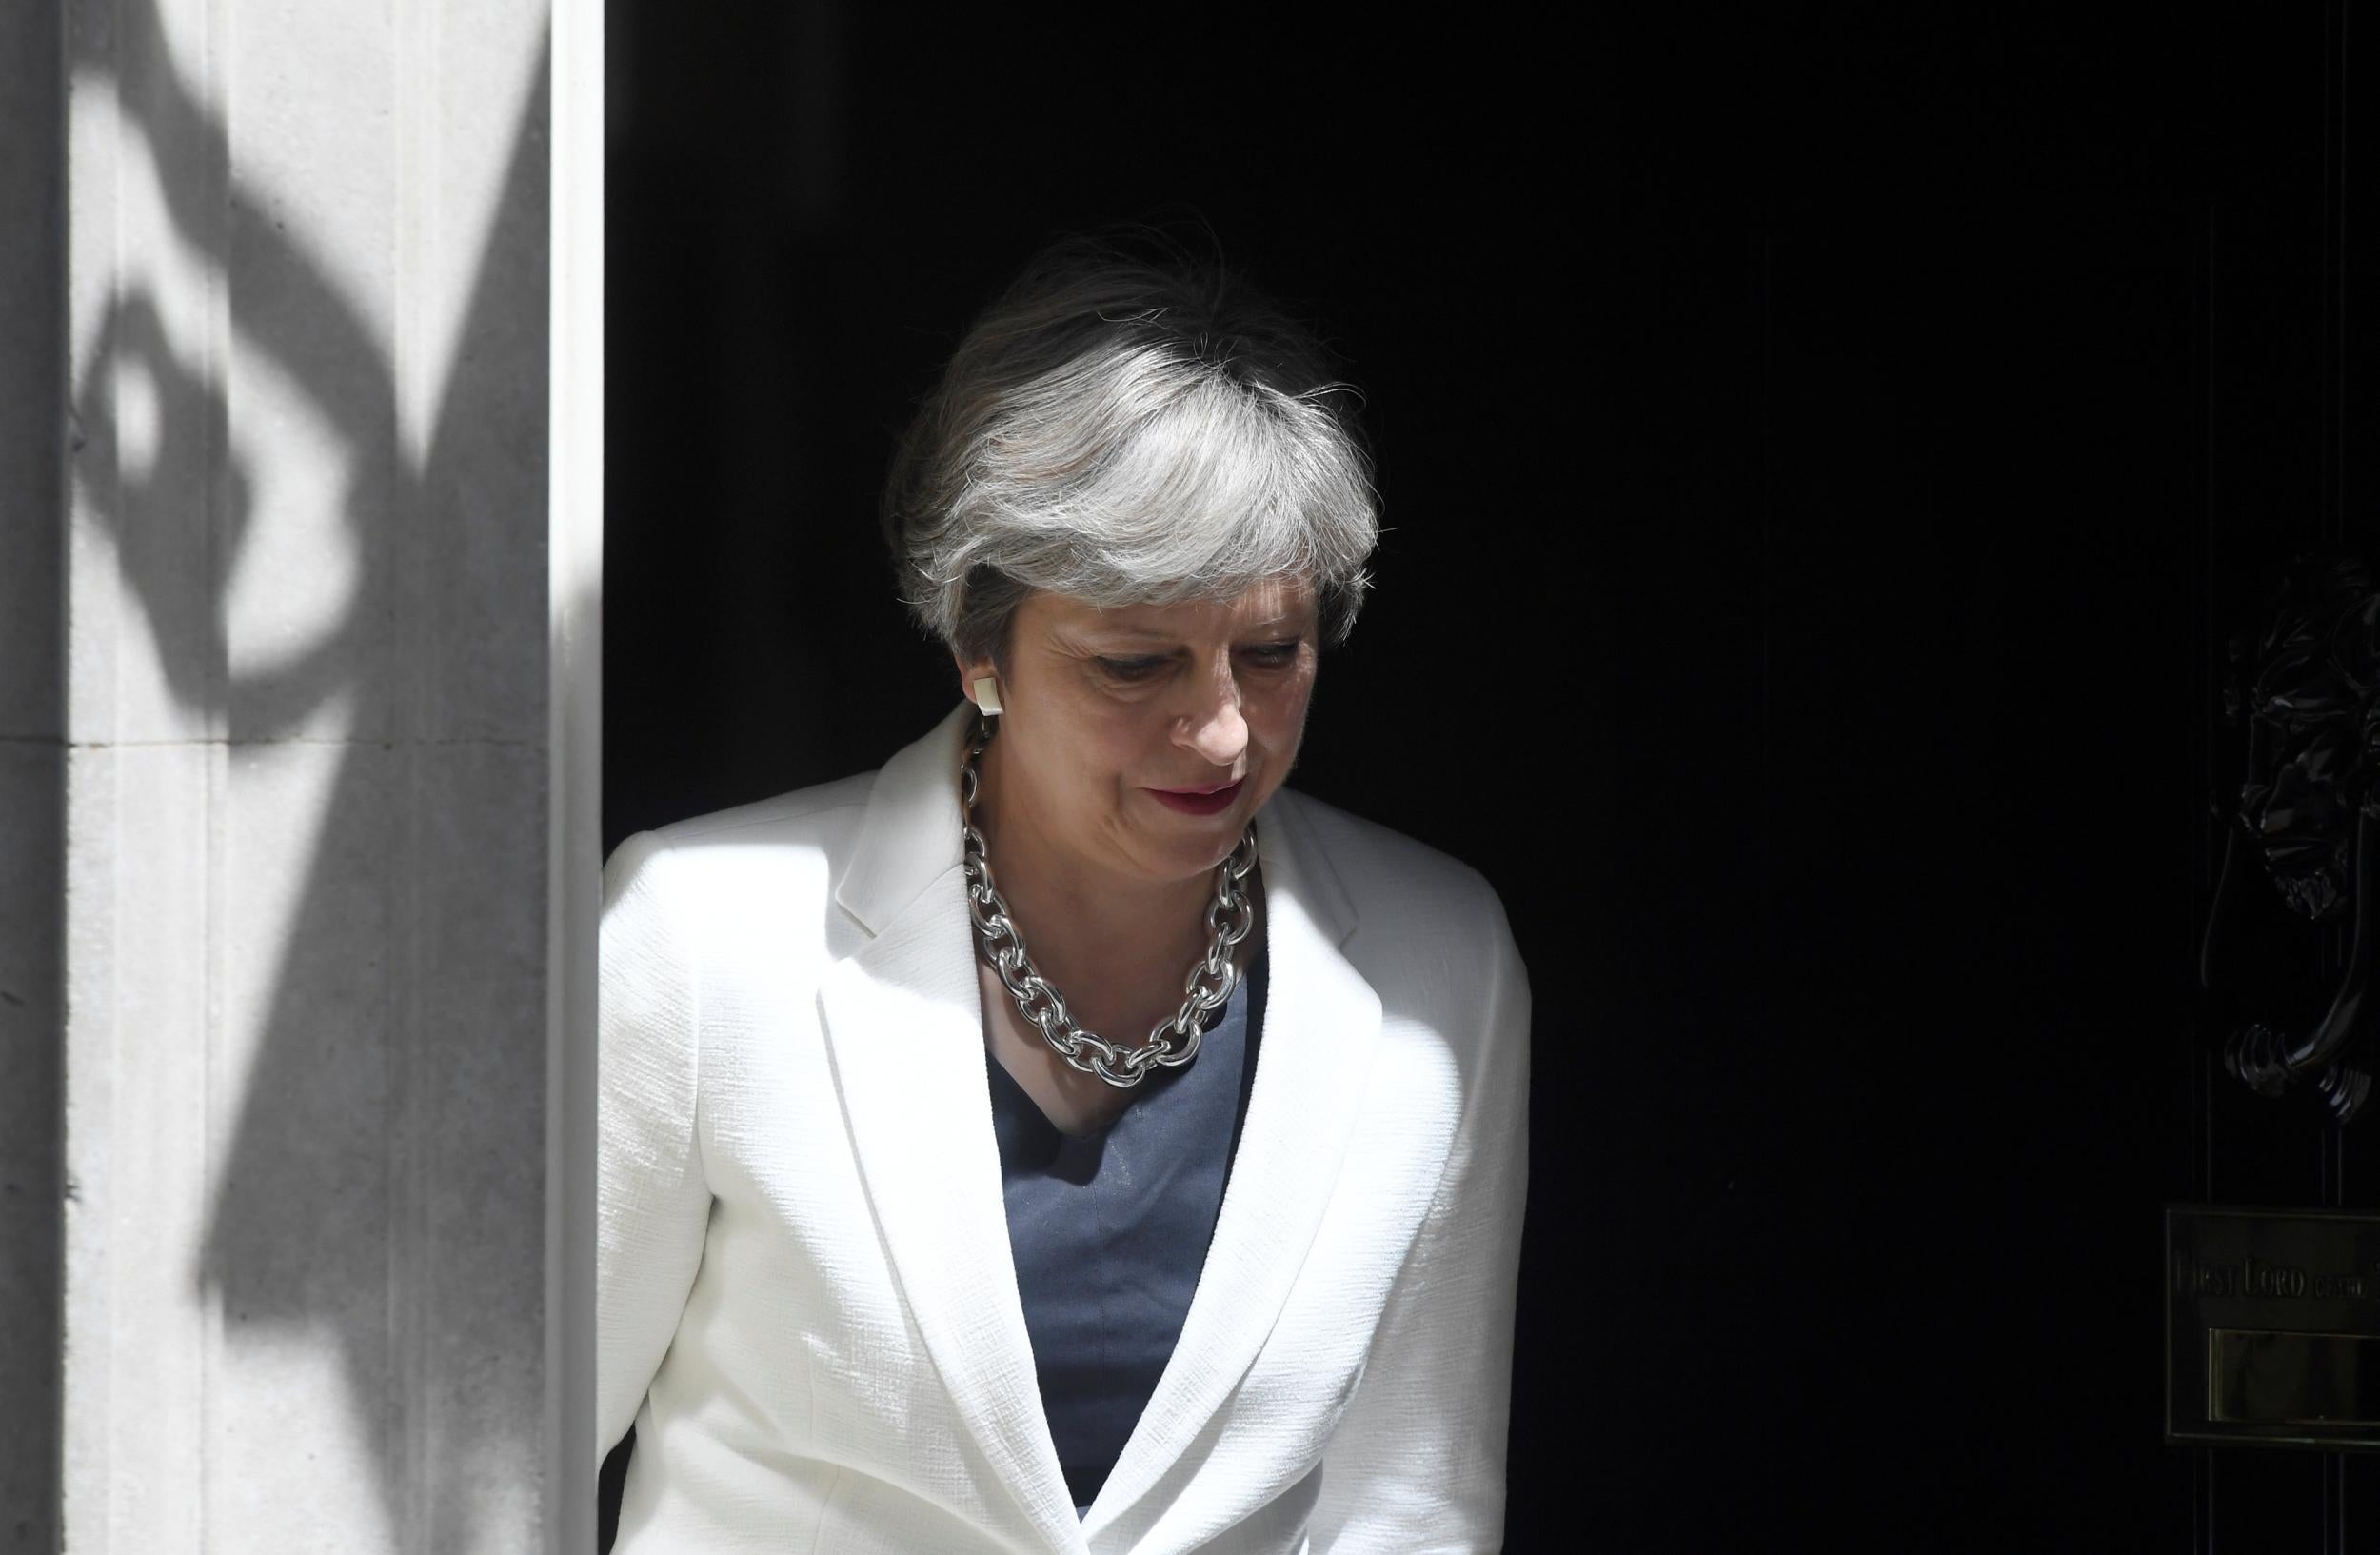 Theresa May hinted that a Cabinet reshuffle is looming